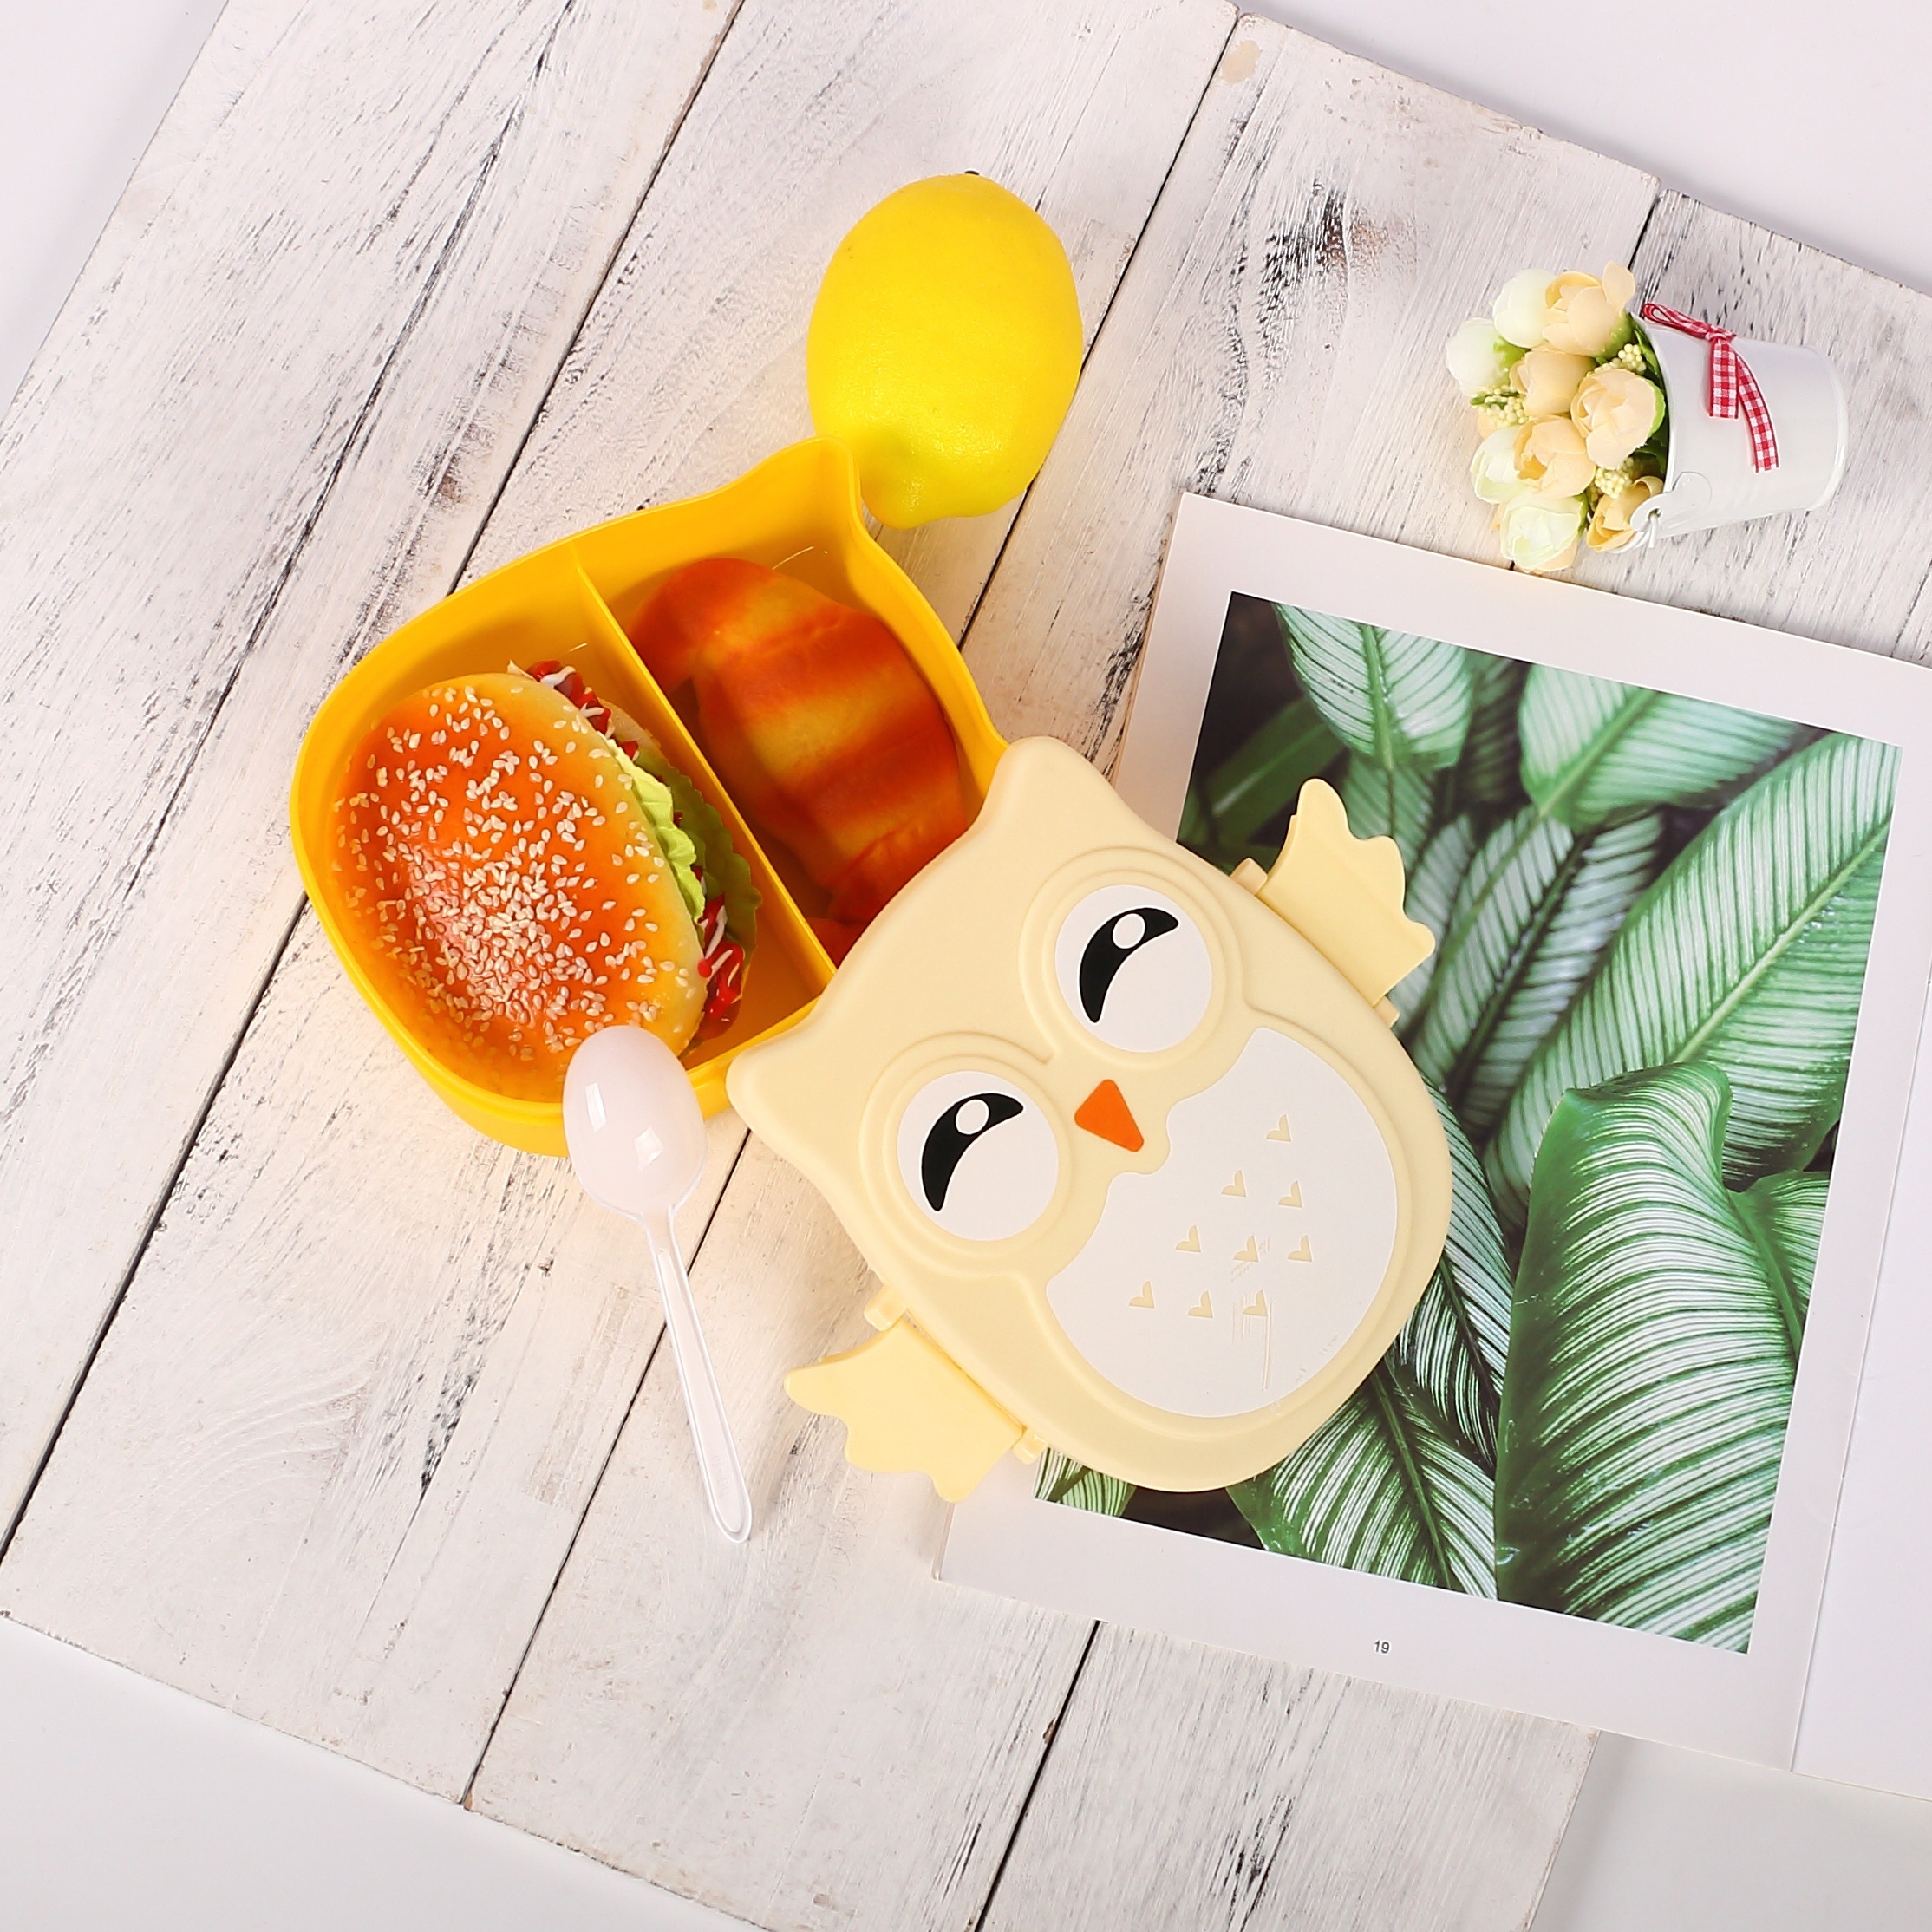 Creative Camera Plastic Lunch Box For Kids Women Sealed Food Storage  Container Square Packed Salad Bowl Kitchen Accessories - Lunch Box -  AliExpress